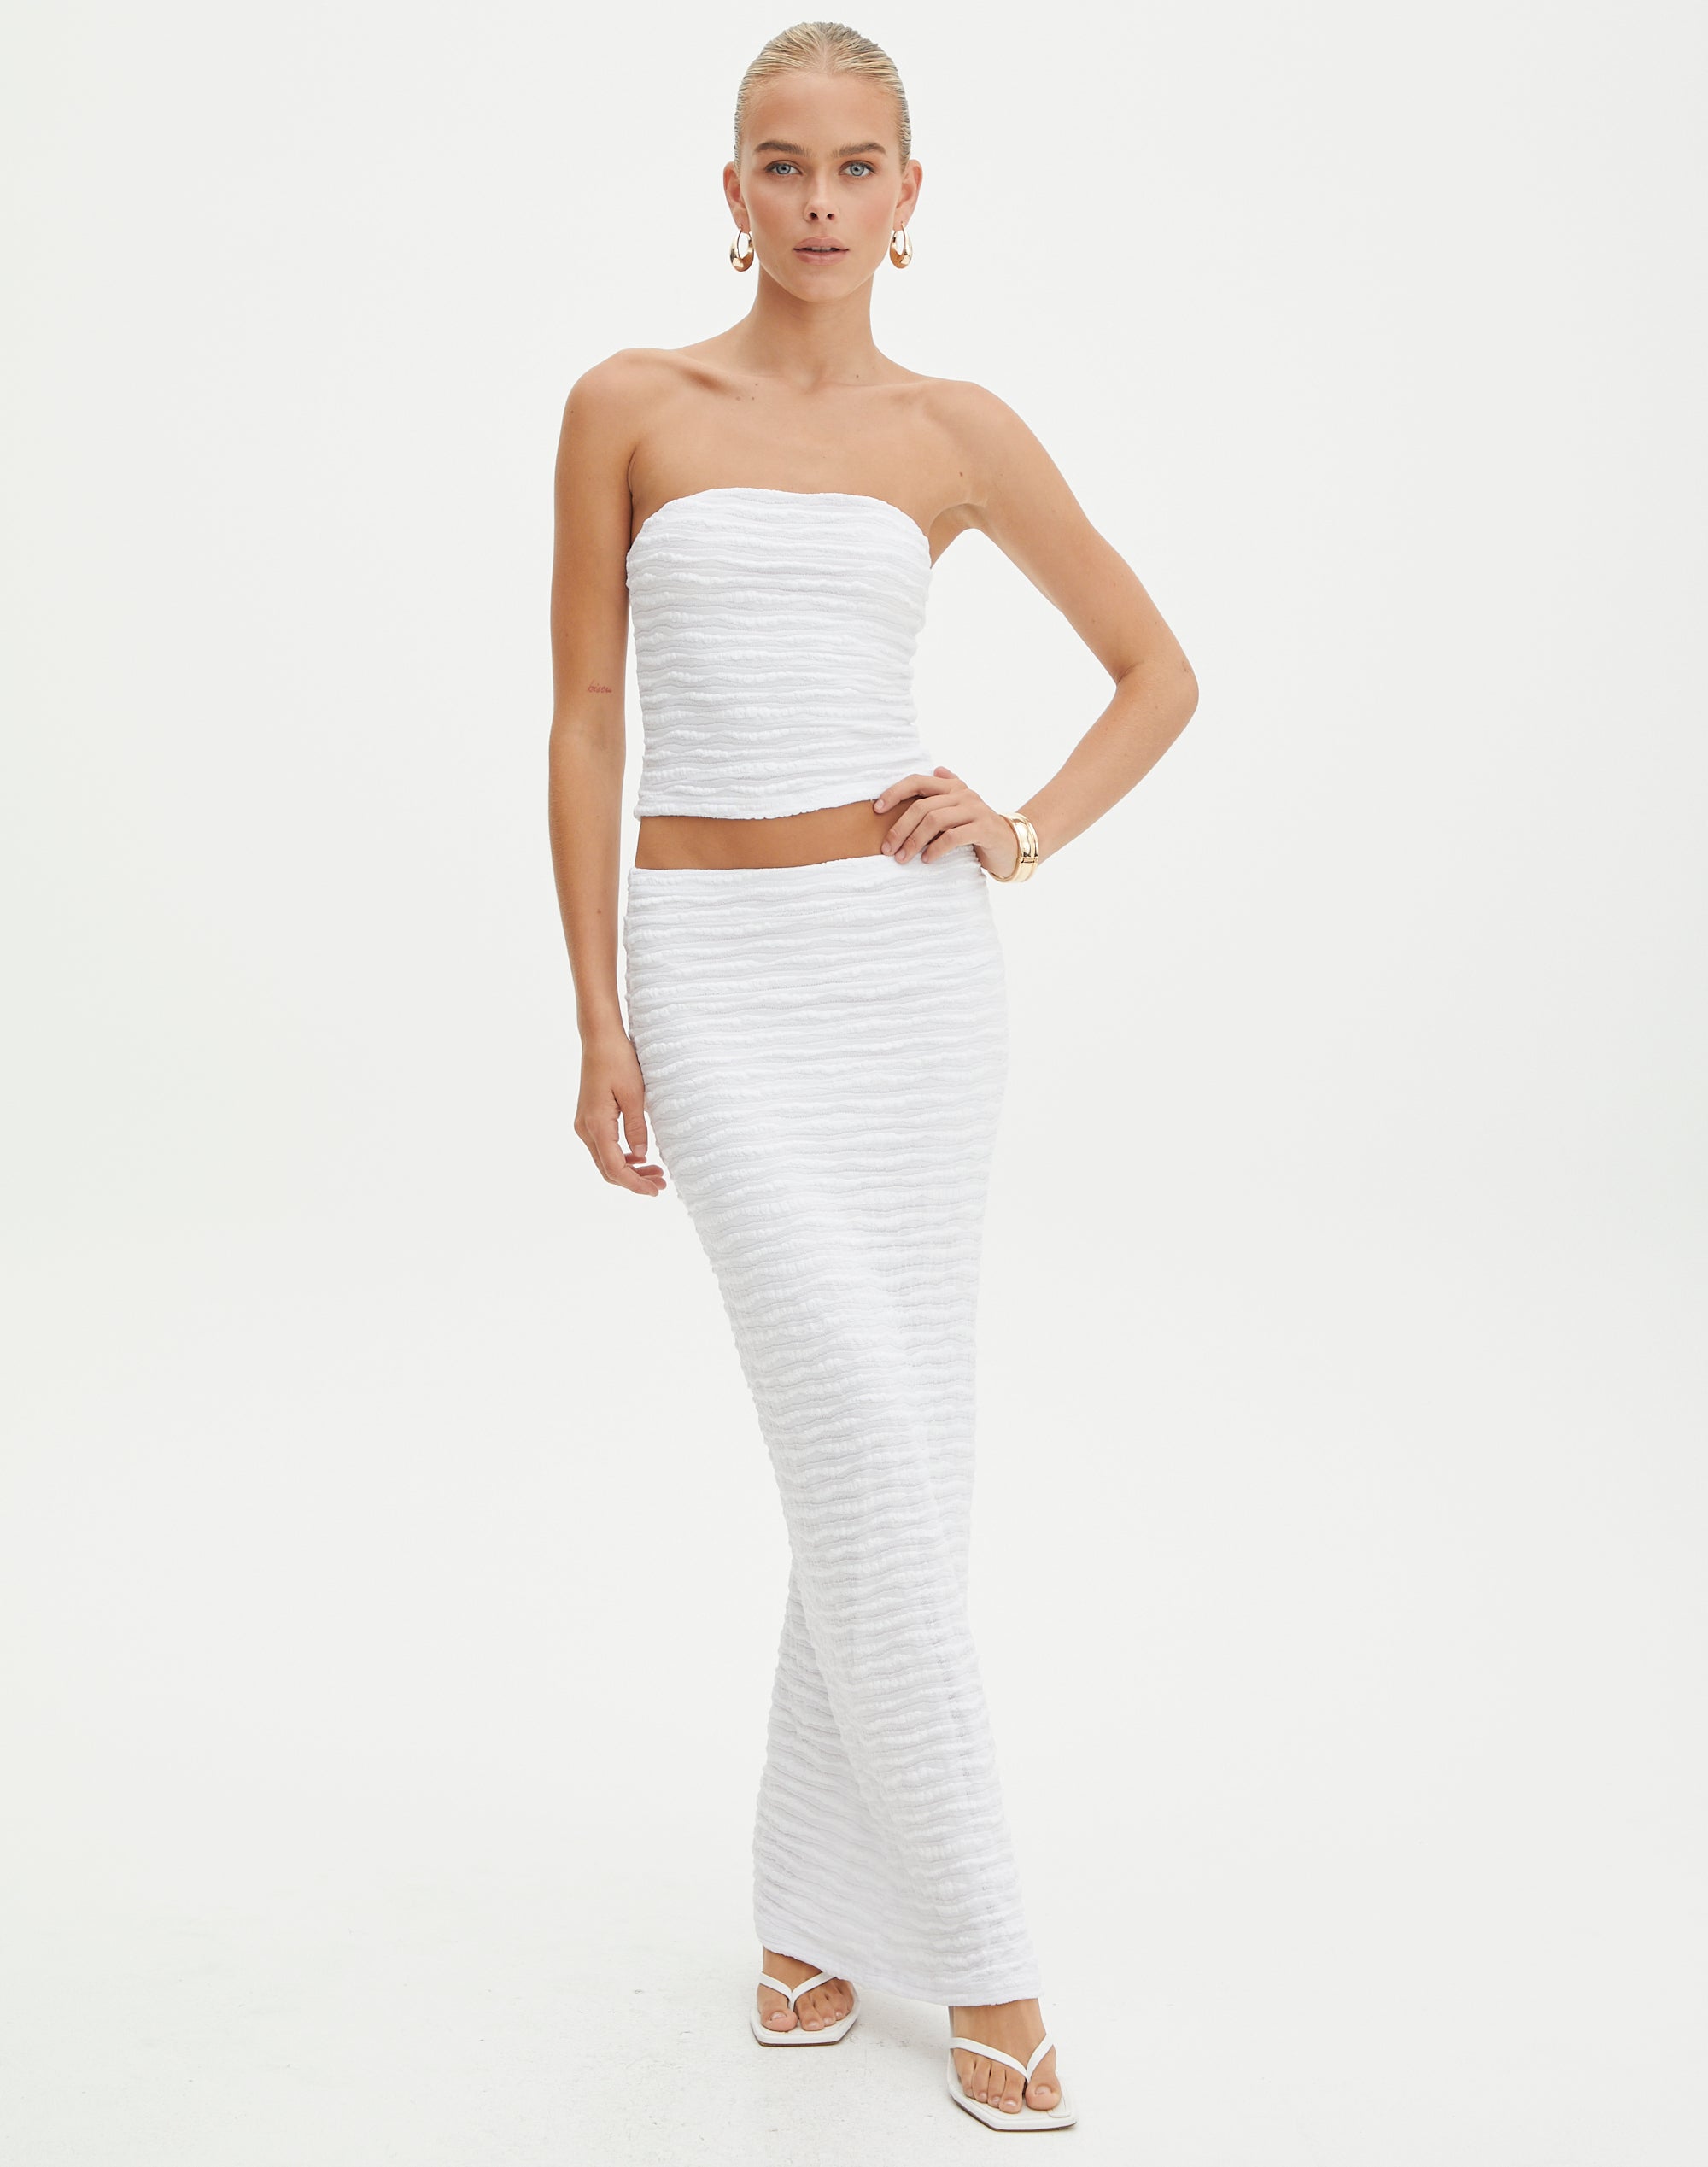 Strapless Textured Bandeau in White